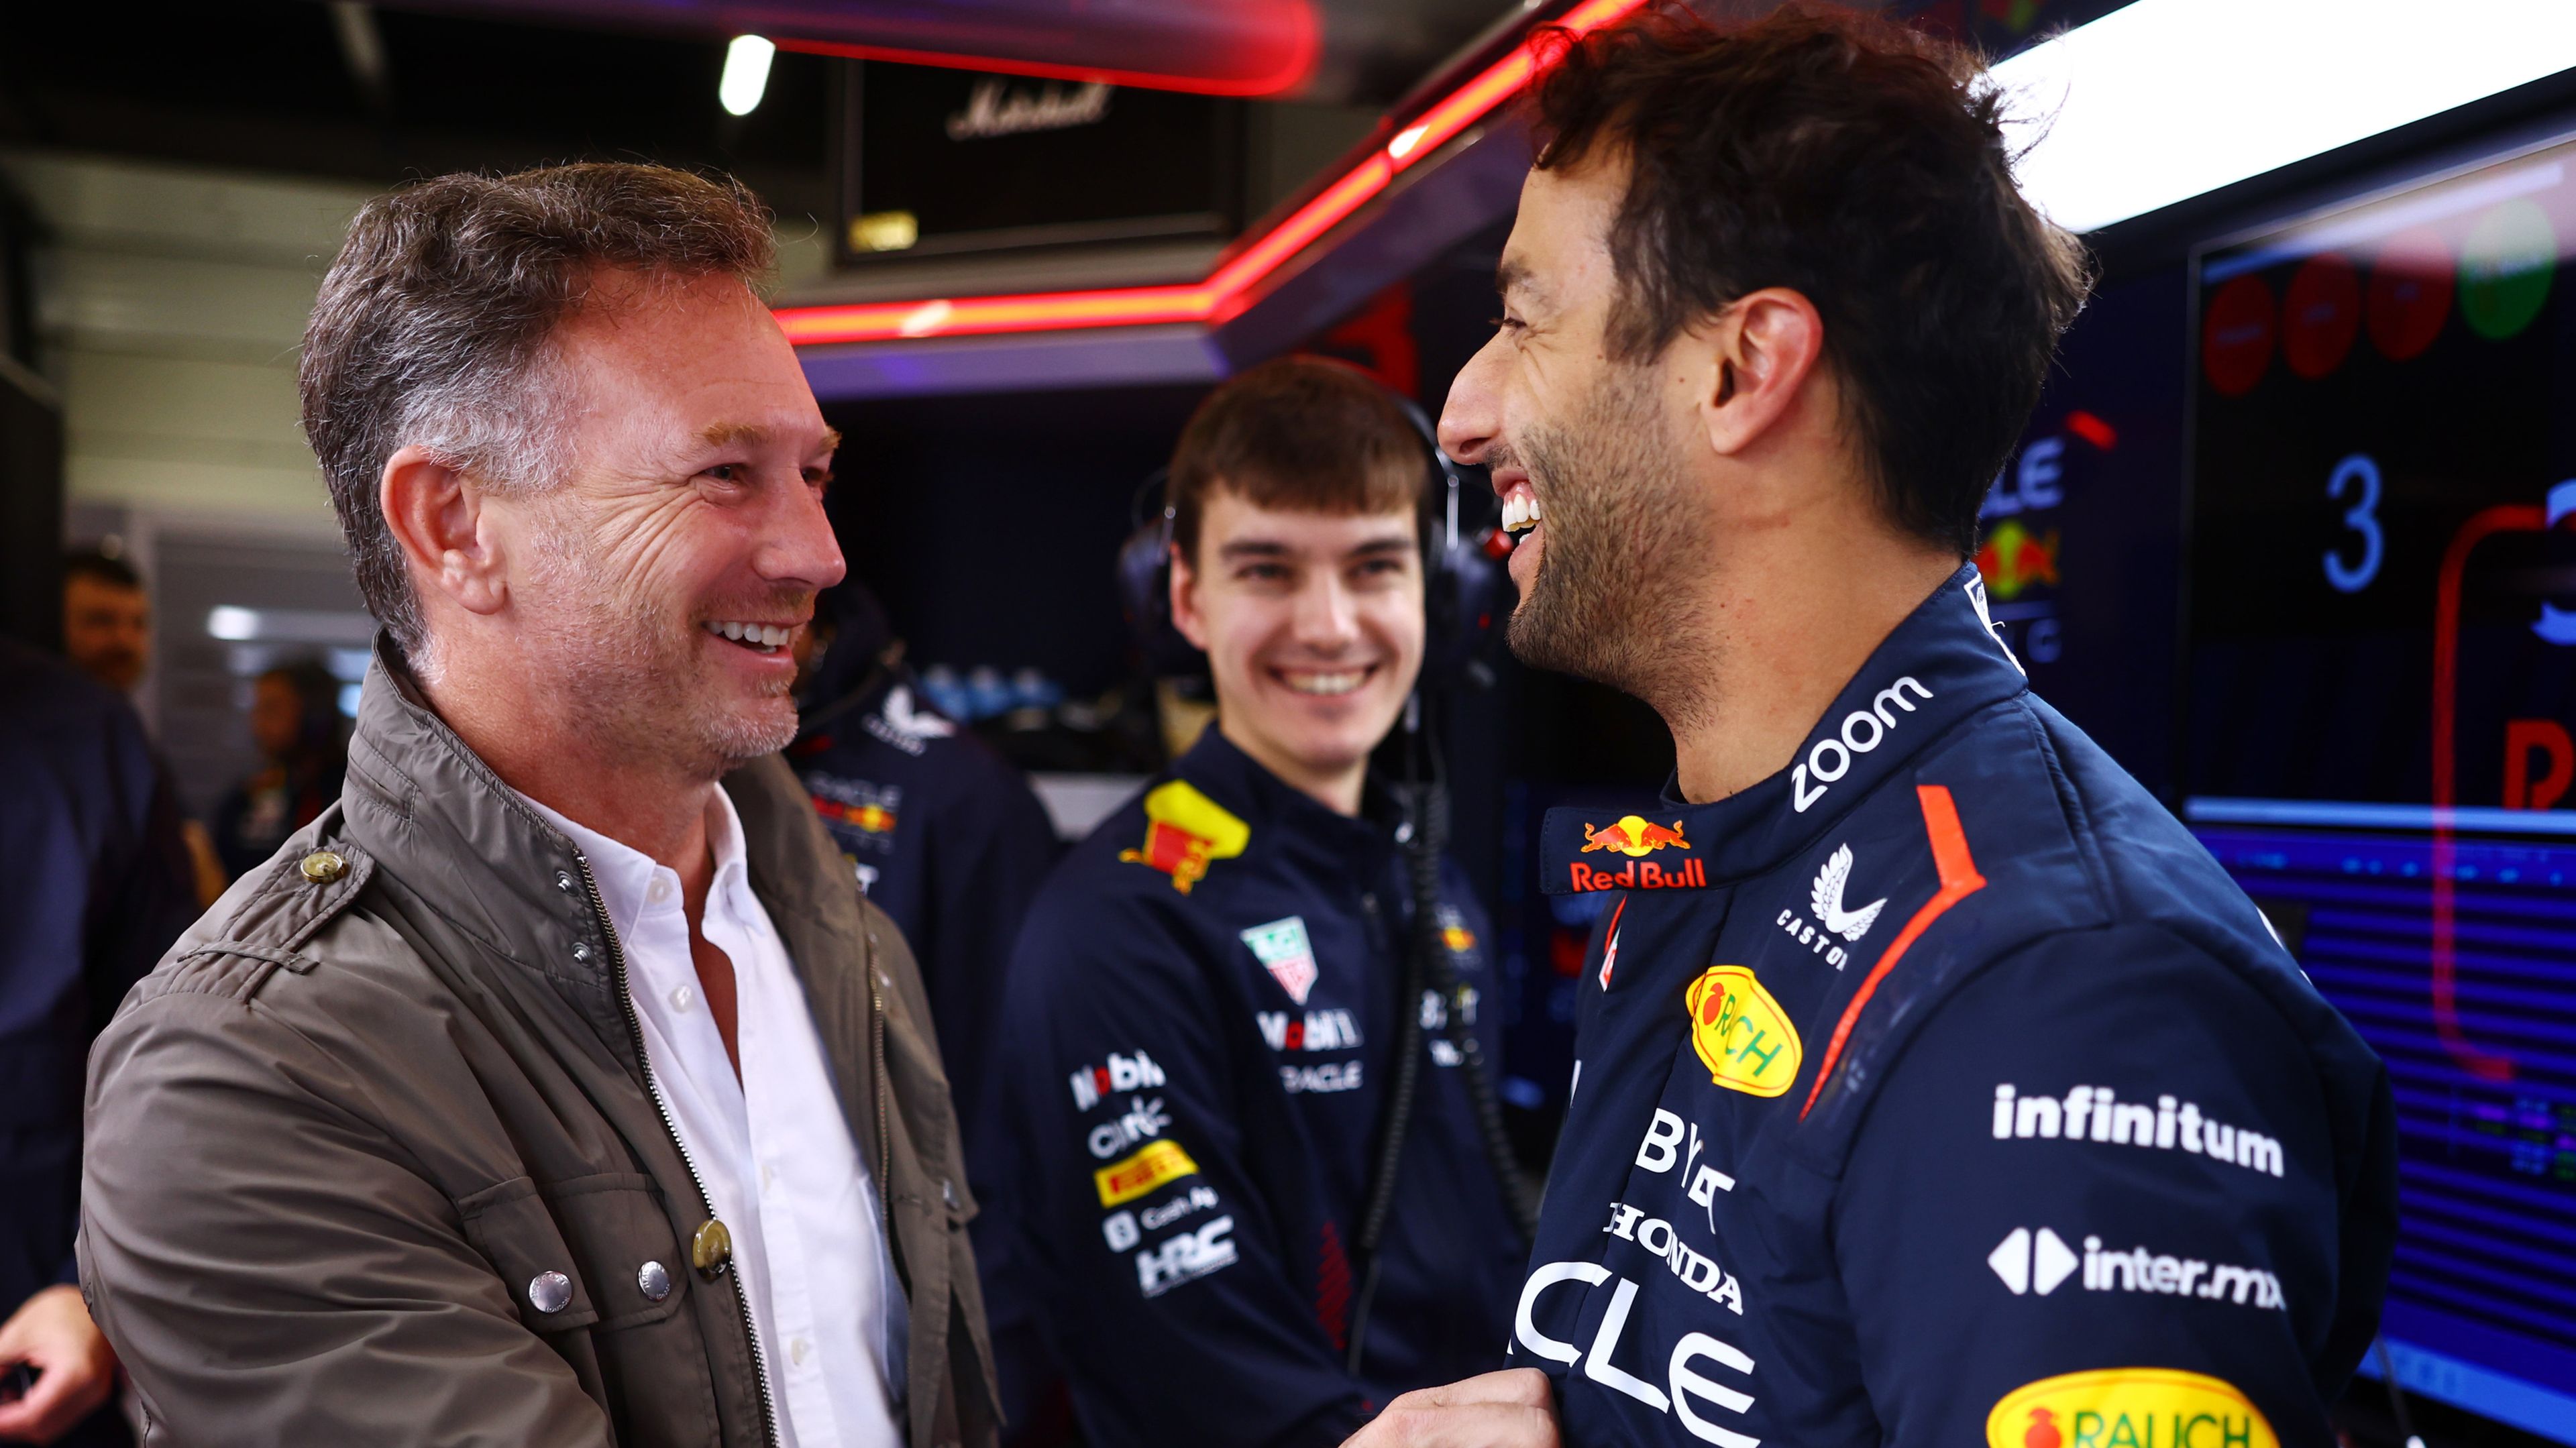 Red Bull team principal Christian Horner (left) with Daniel Ricciardo during the tyre test at Silverstone.